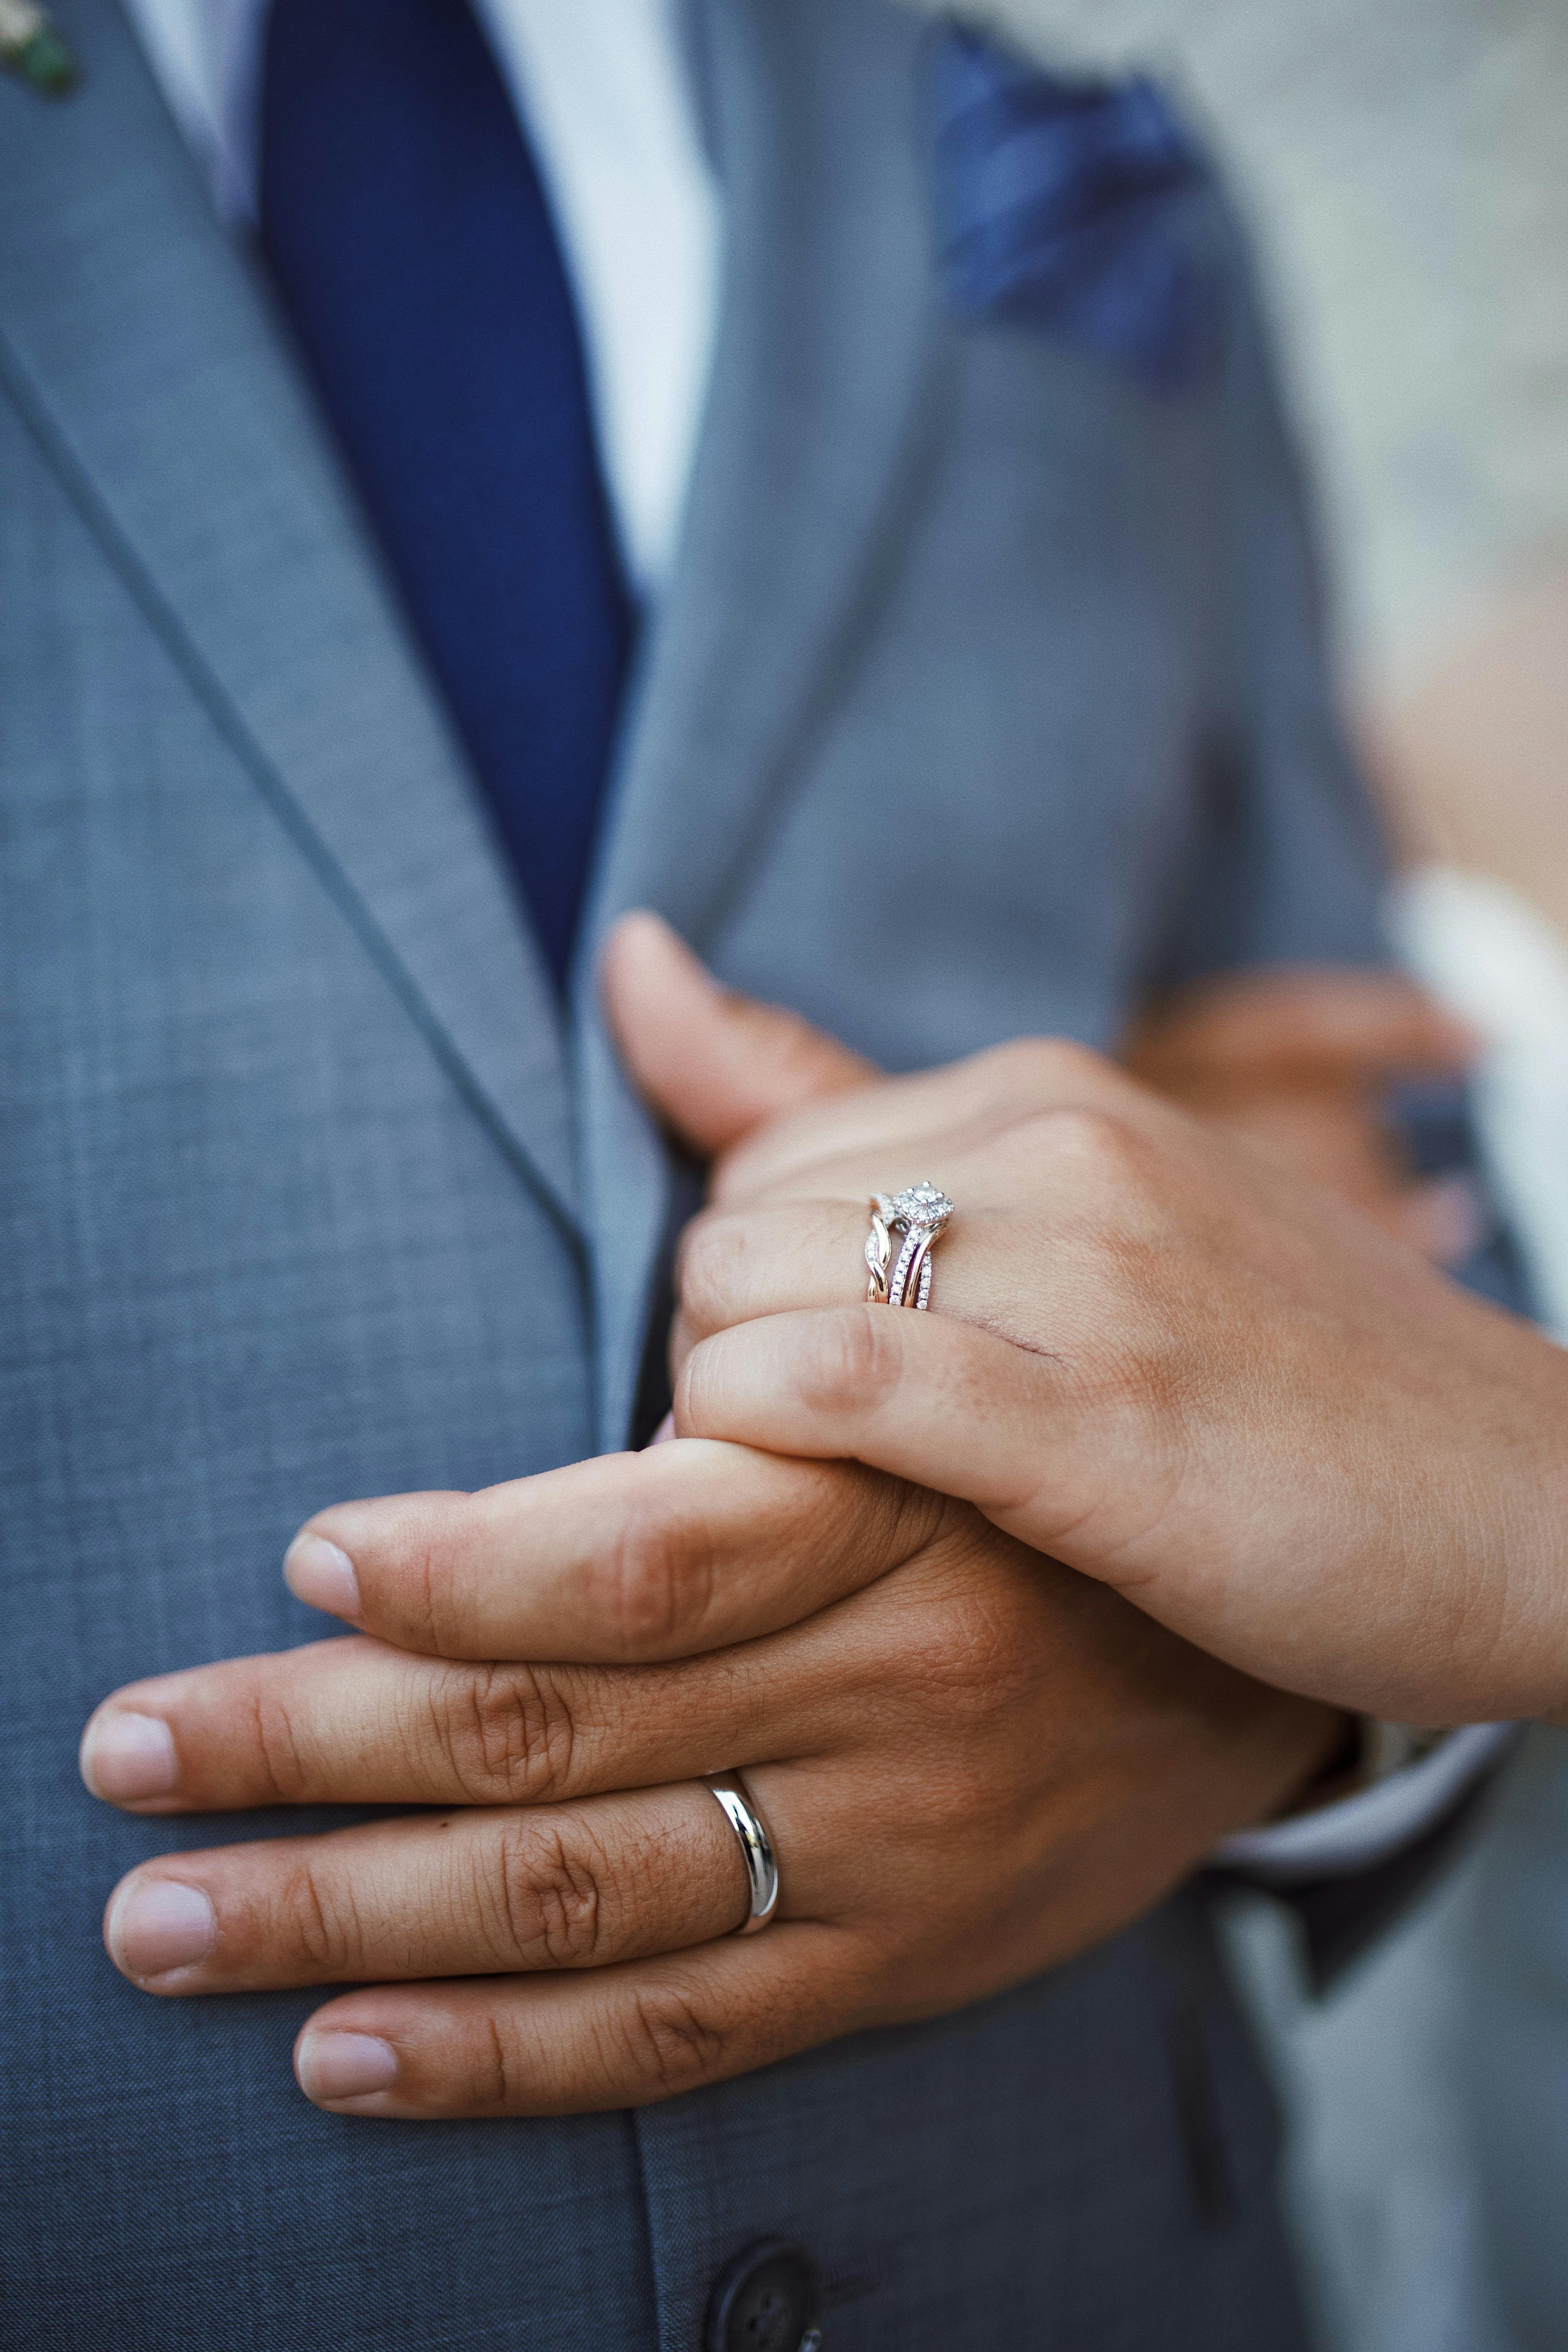 How To Take The Perfect Engagement Ring Photo! - Adiamor Blog